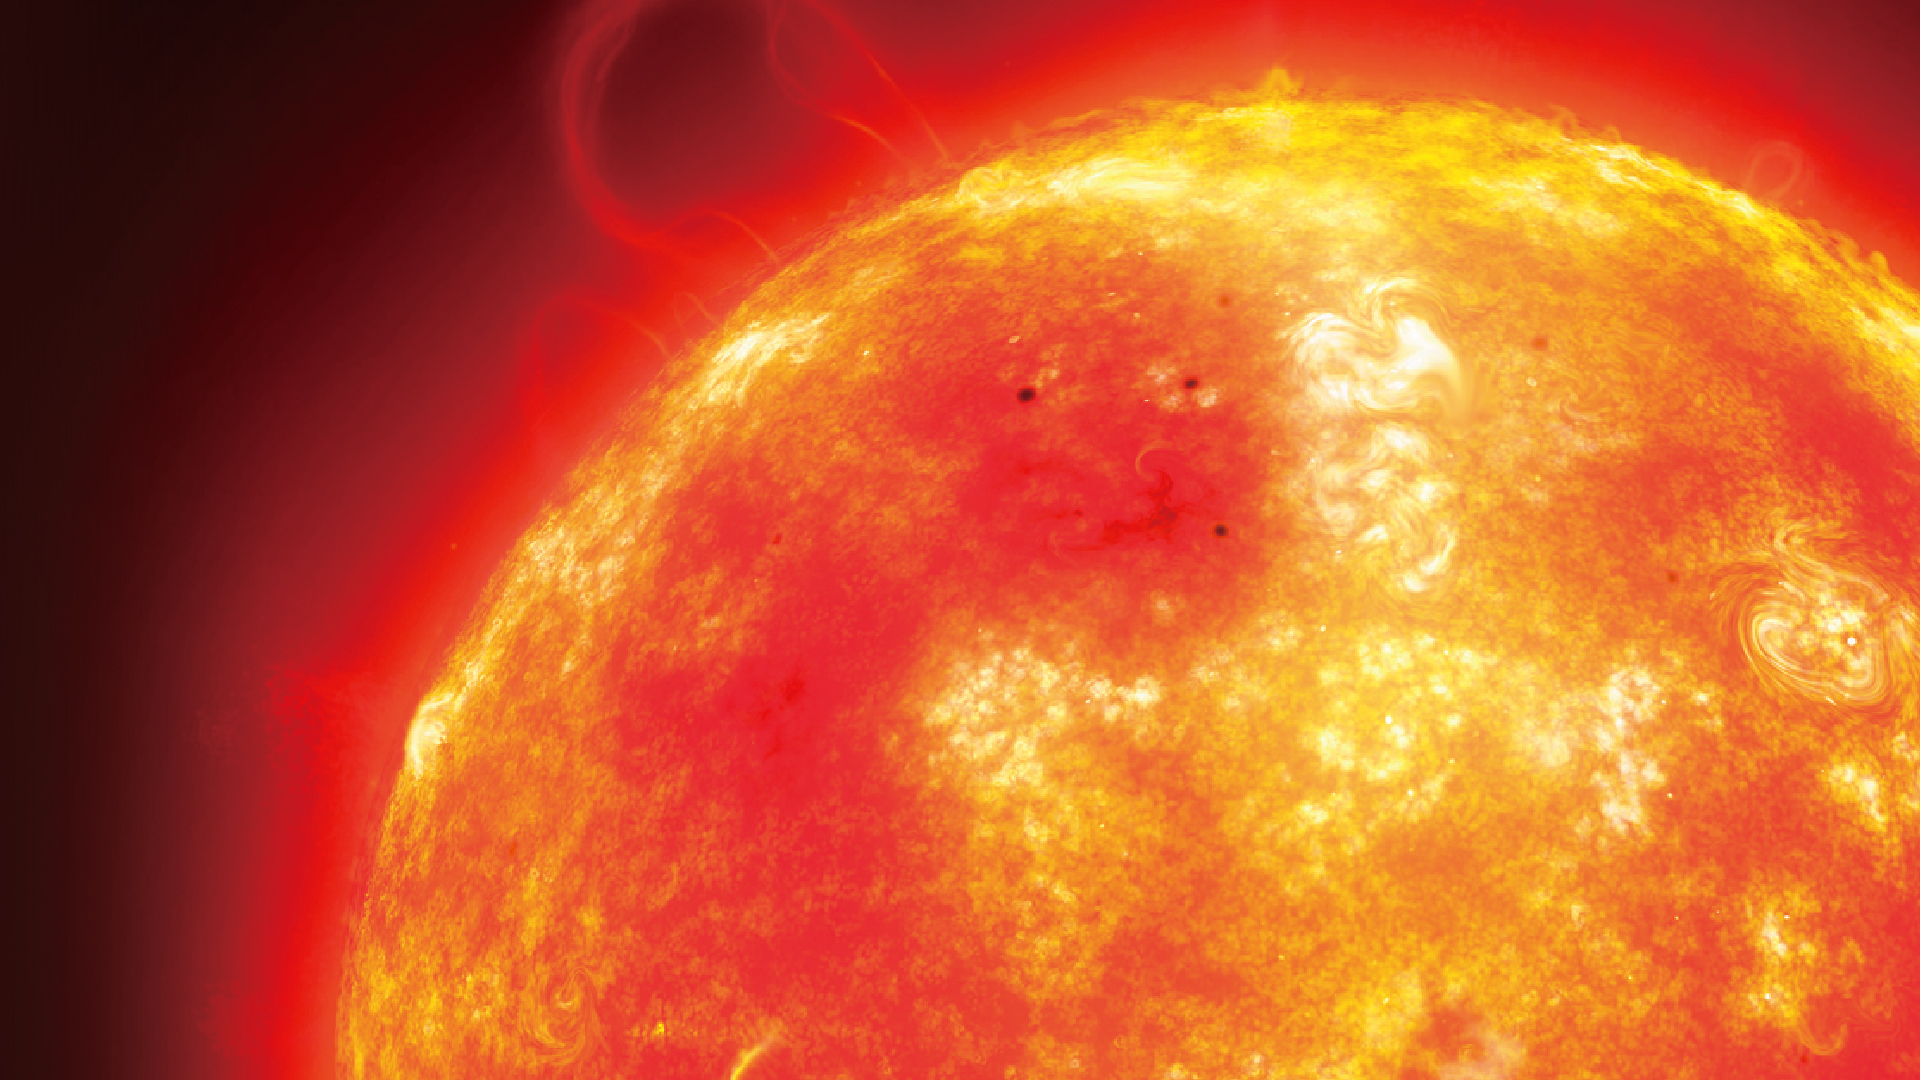 Nuclear fusion technology to realize "sun on the ground"